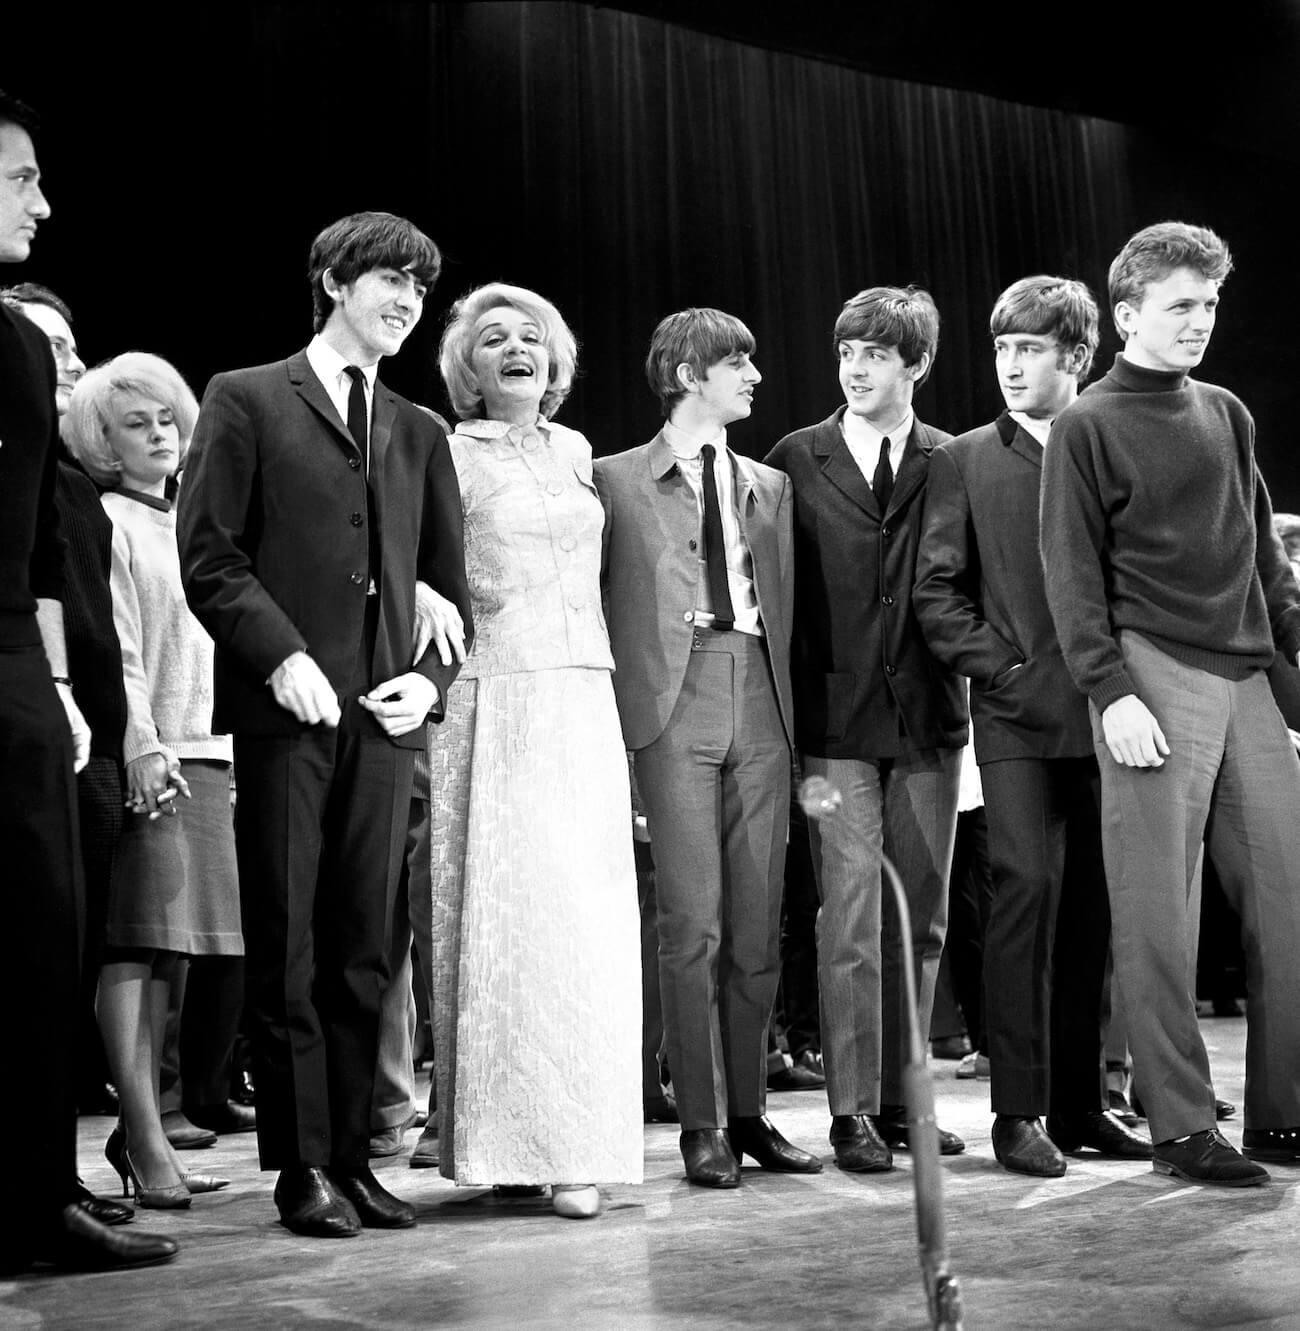 The Beatles and Marlene Dietrich at the Royal Variety Performance in 1963.